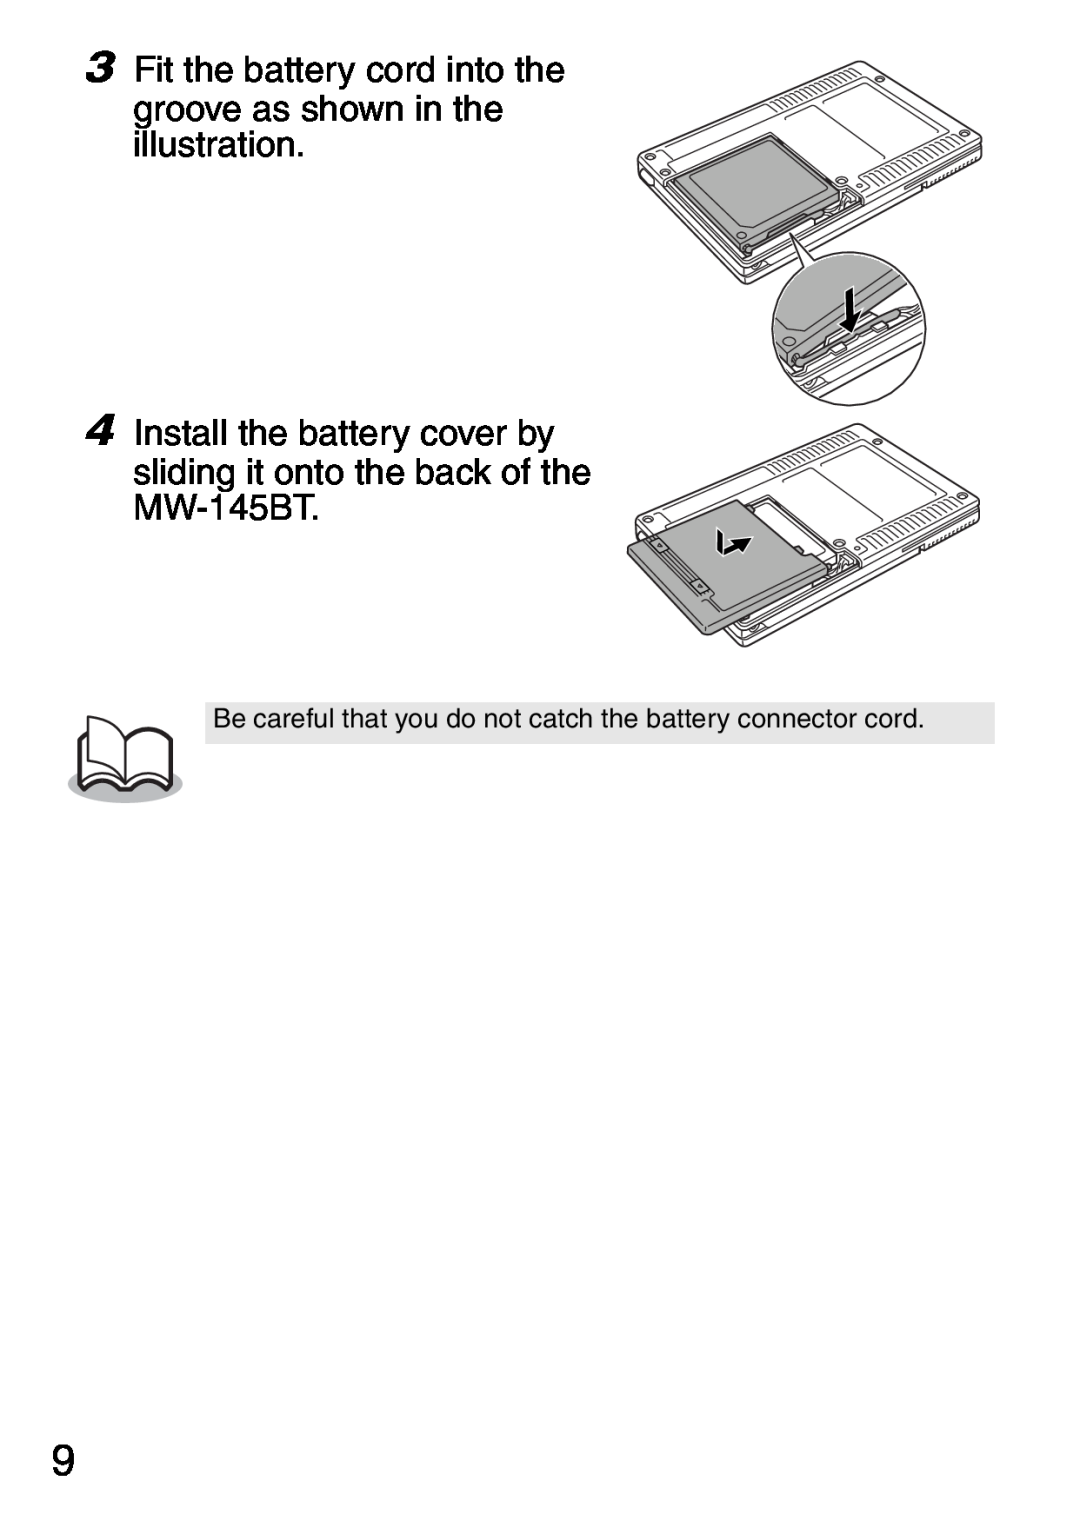 Brother MW-145BT manual Fit the battery cord into the groove as shown in the illustration, Install the battery cover by 